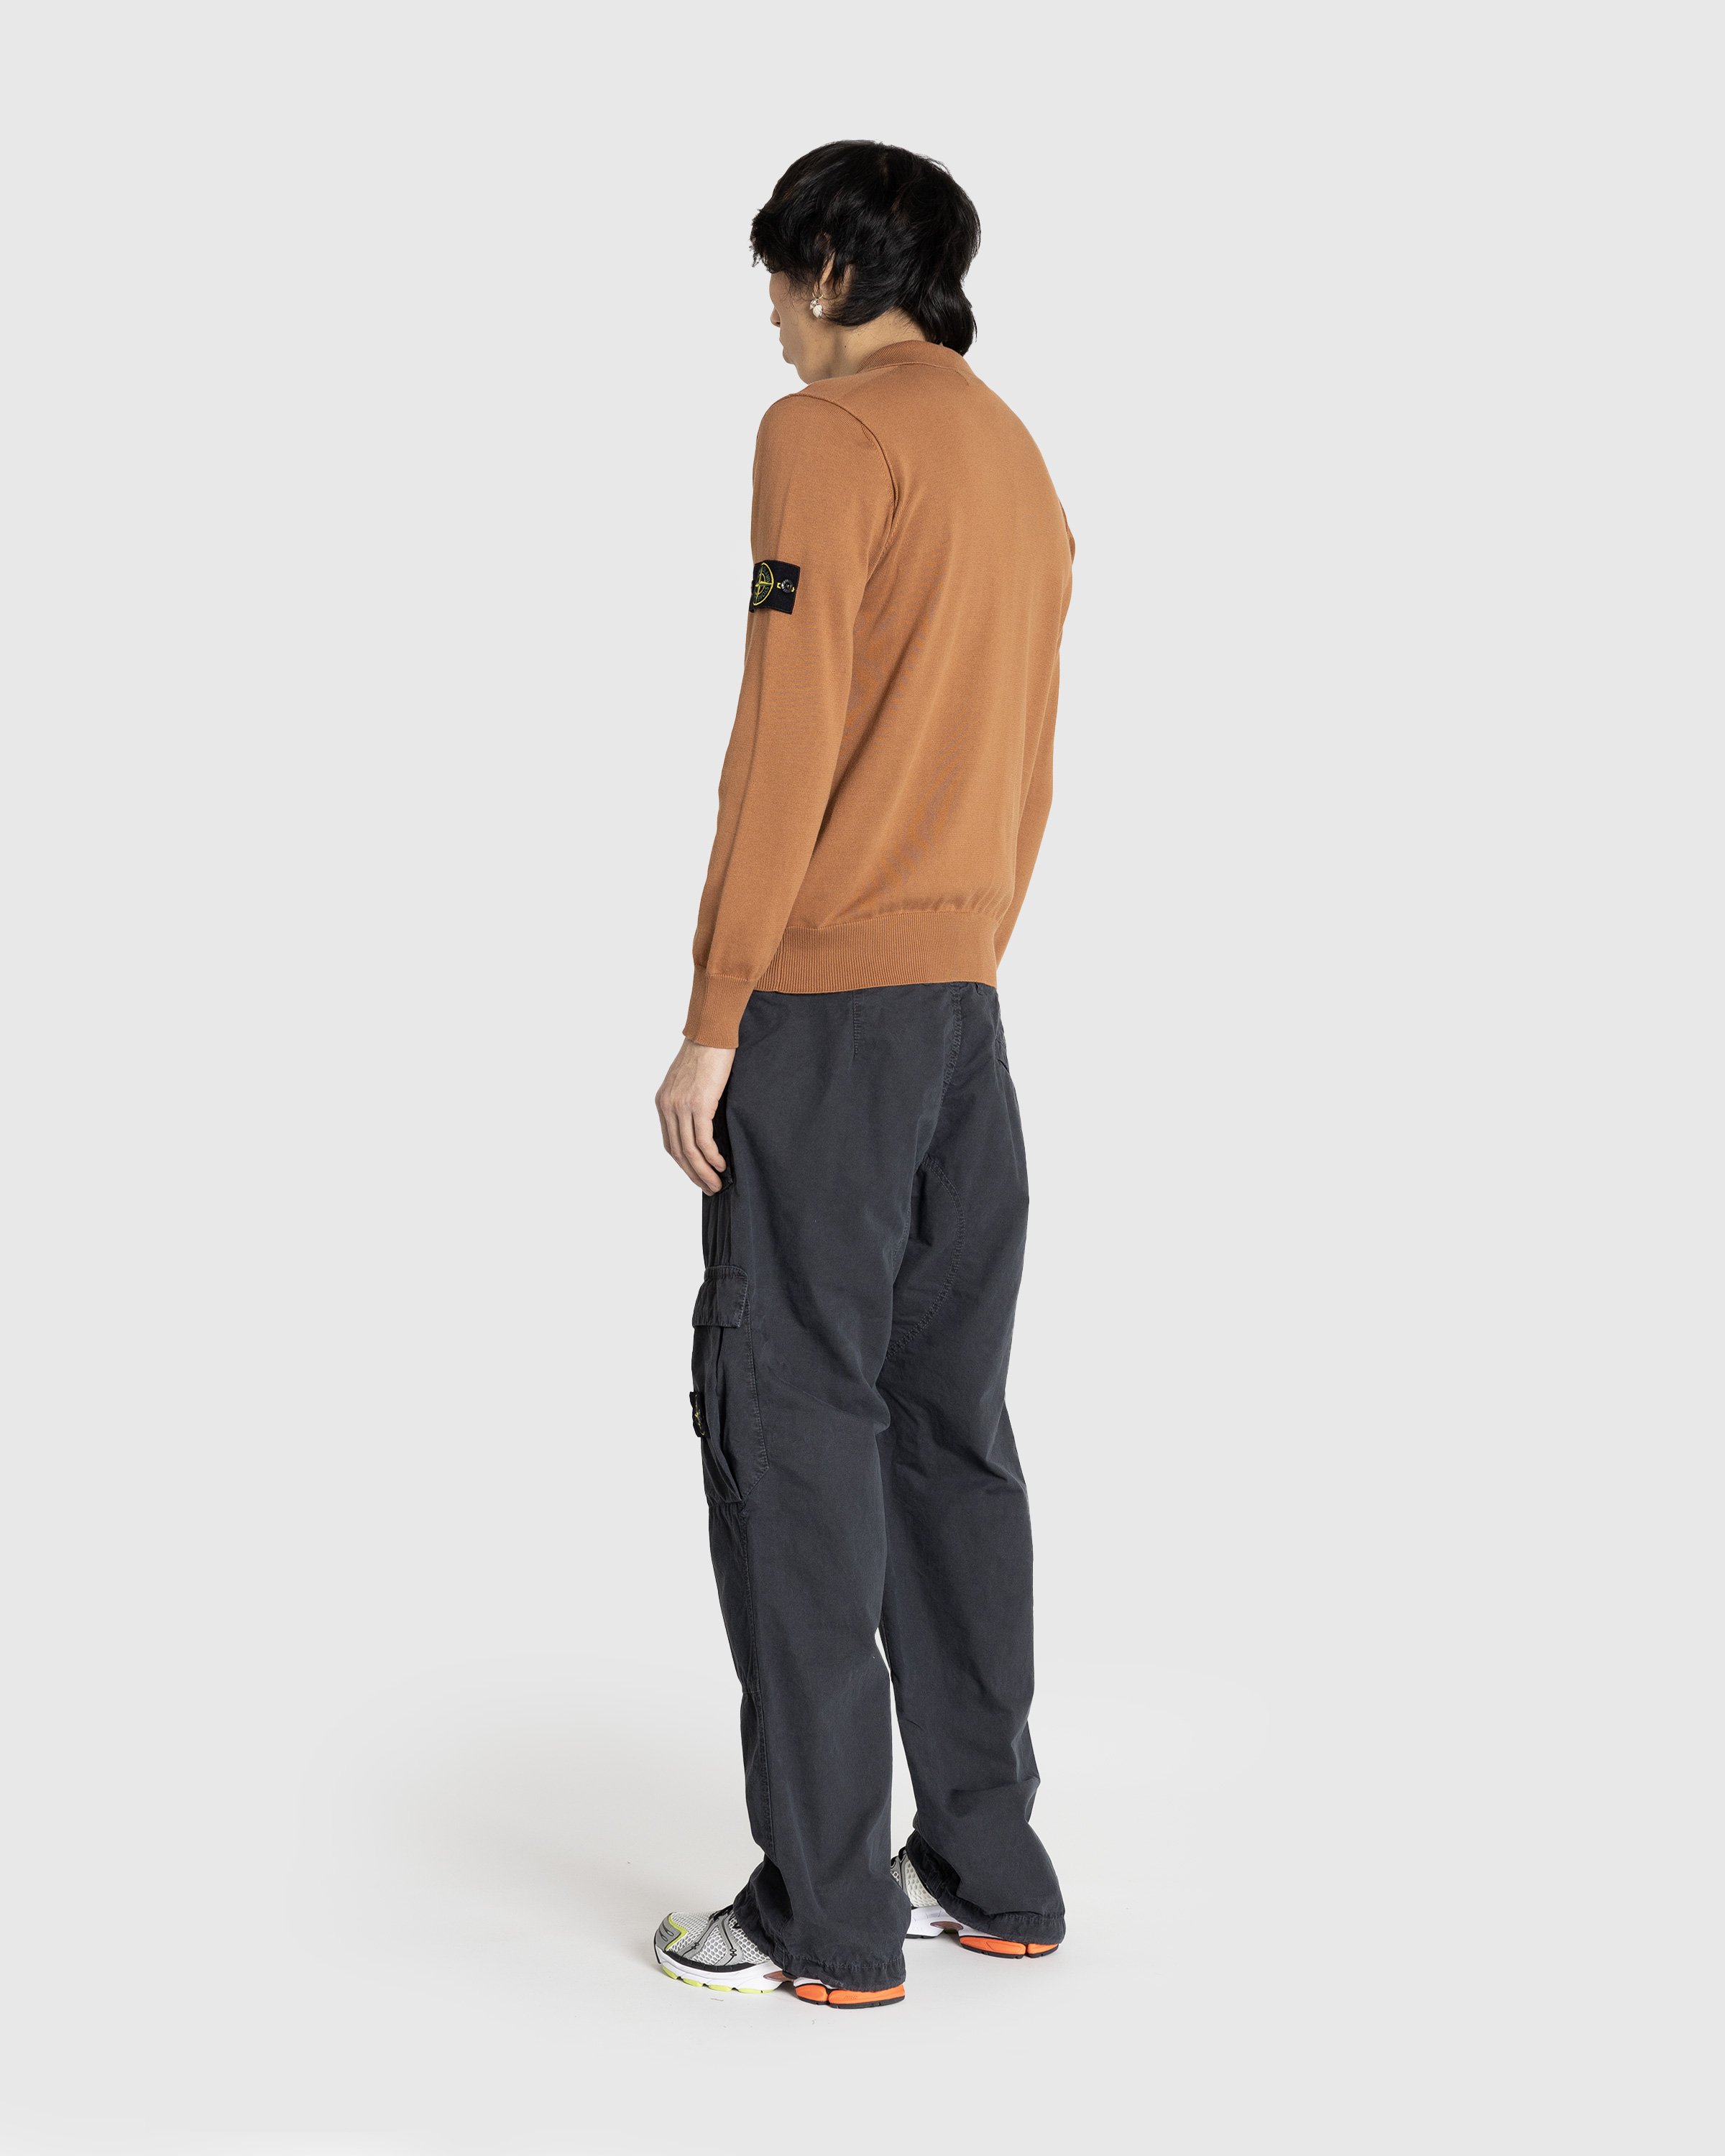 Stone Island - KNITWEAR RUST - Clothing - Red - Image 4